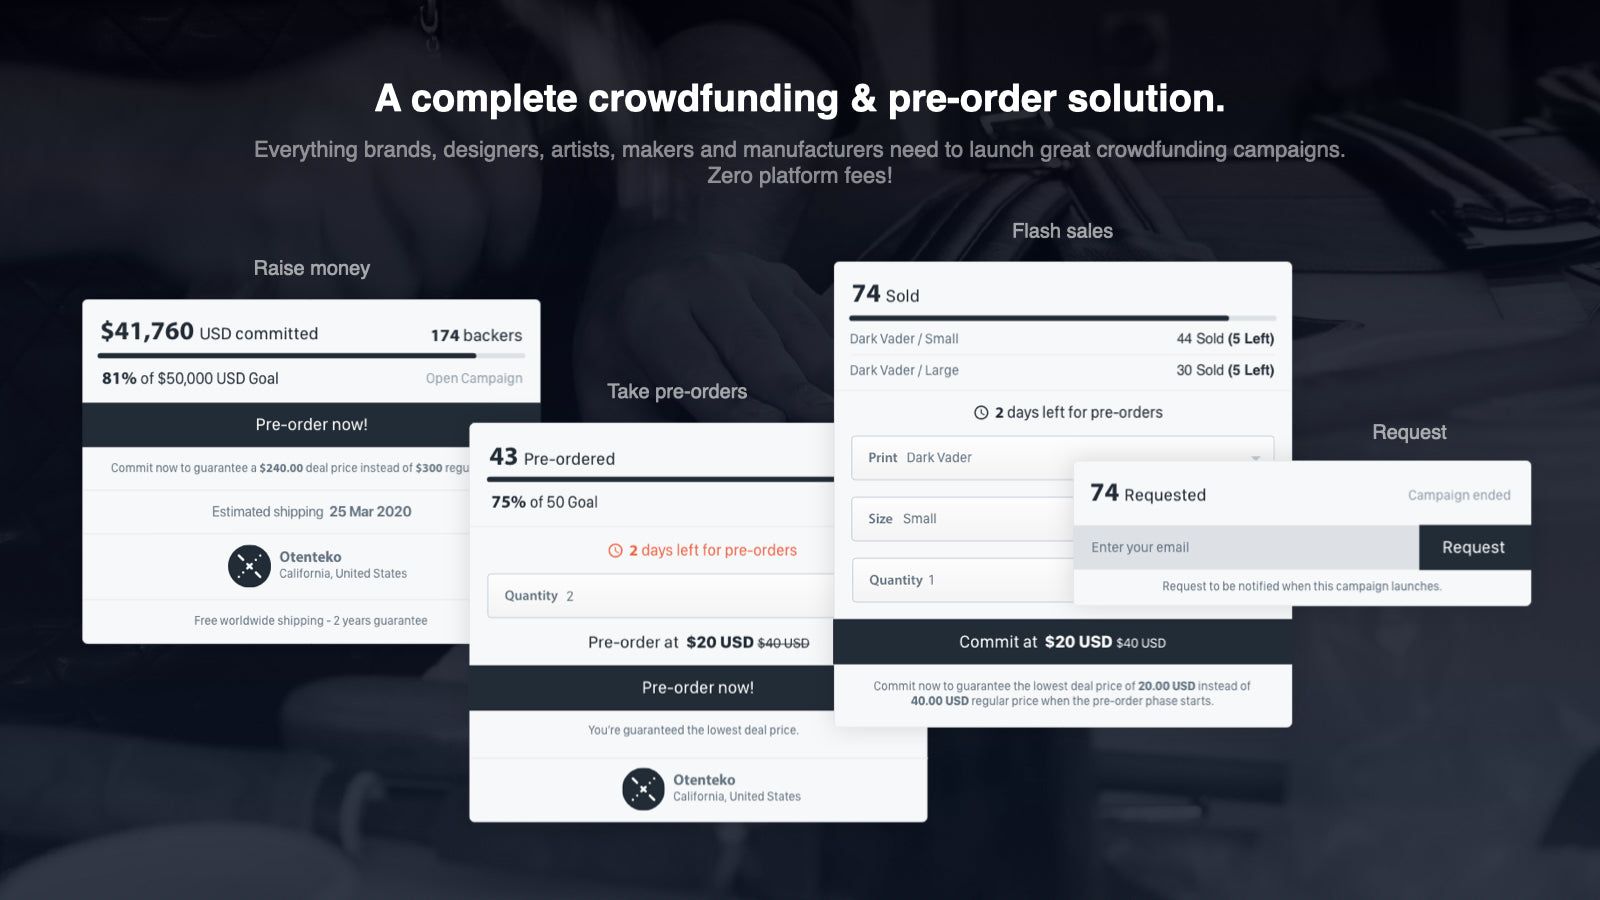 A powerful crowdfunding and pre-order solution.